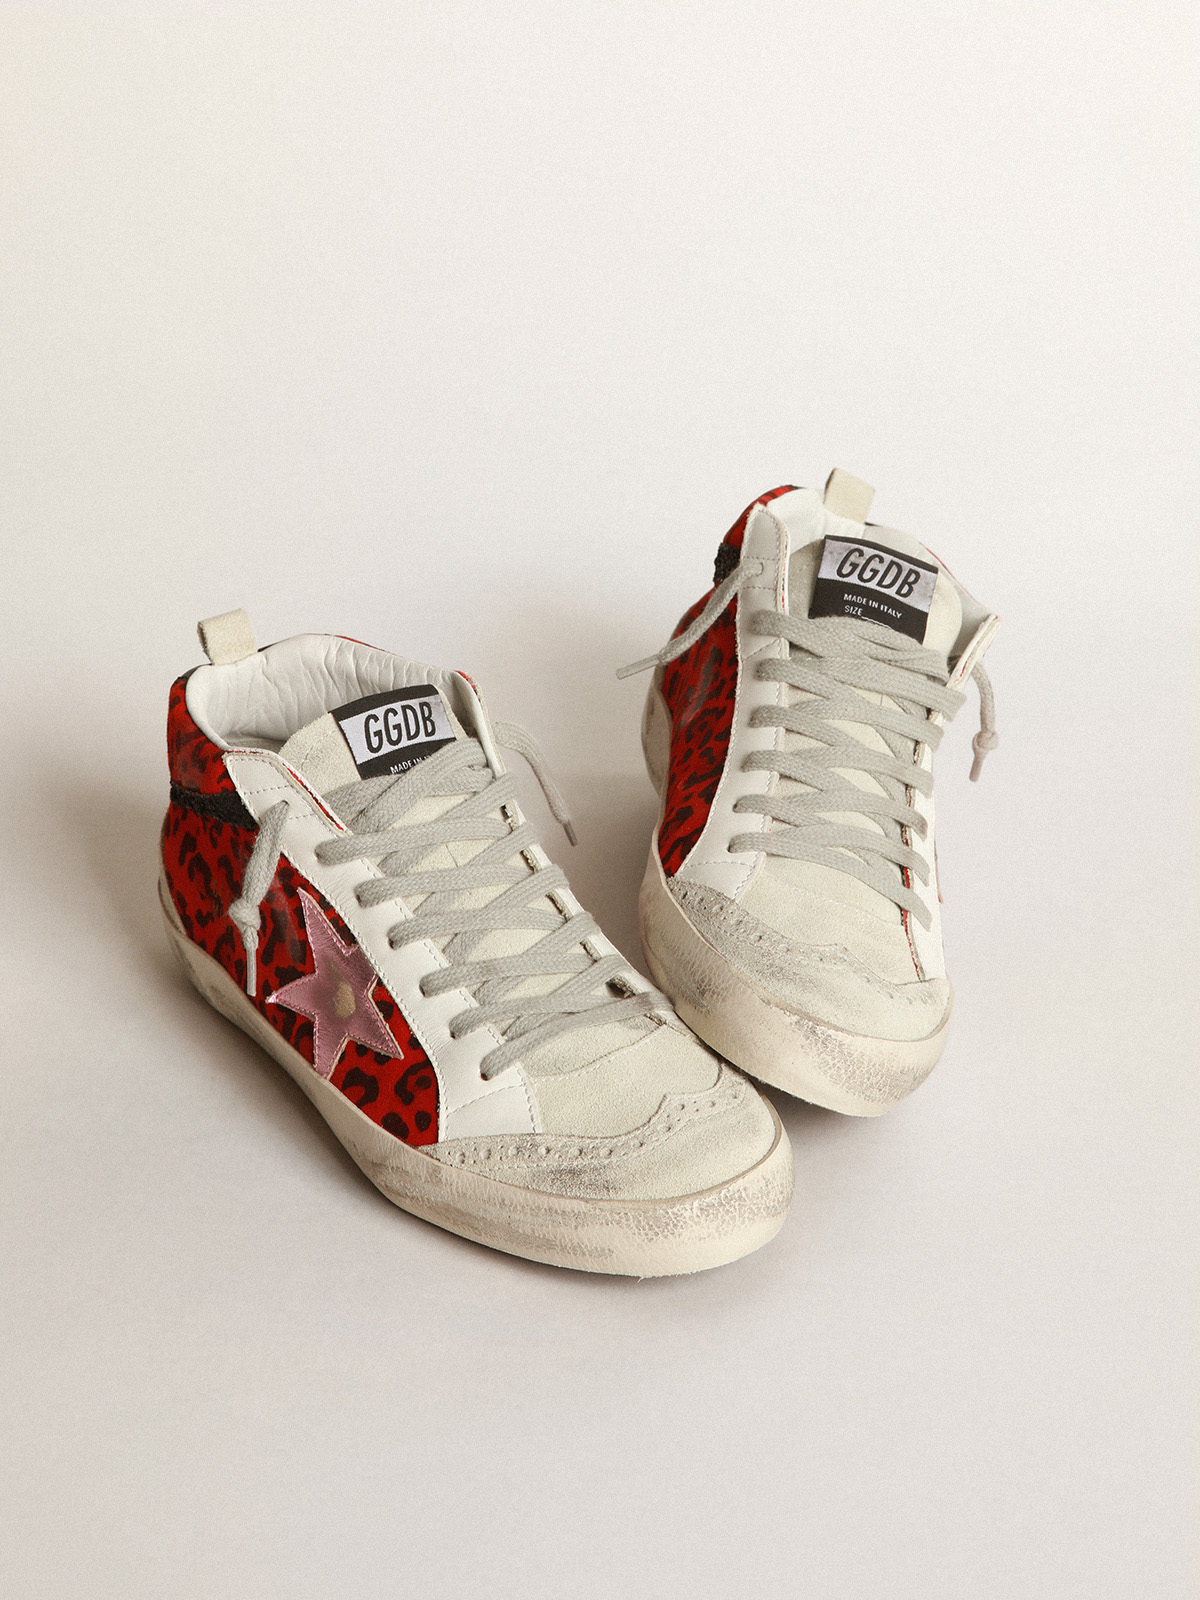 Mid Star sneakers in red leopard-print suede with pink laminated leather  star and black glitter flash | Golden Goose